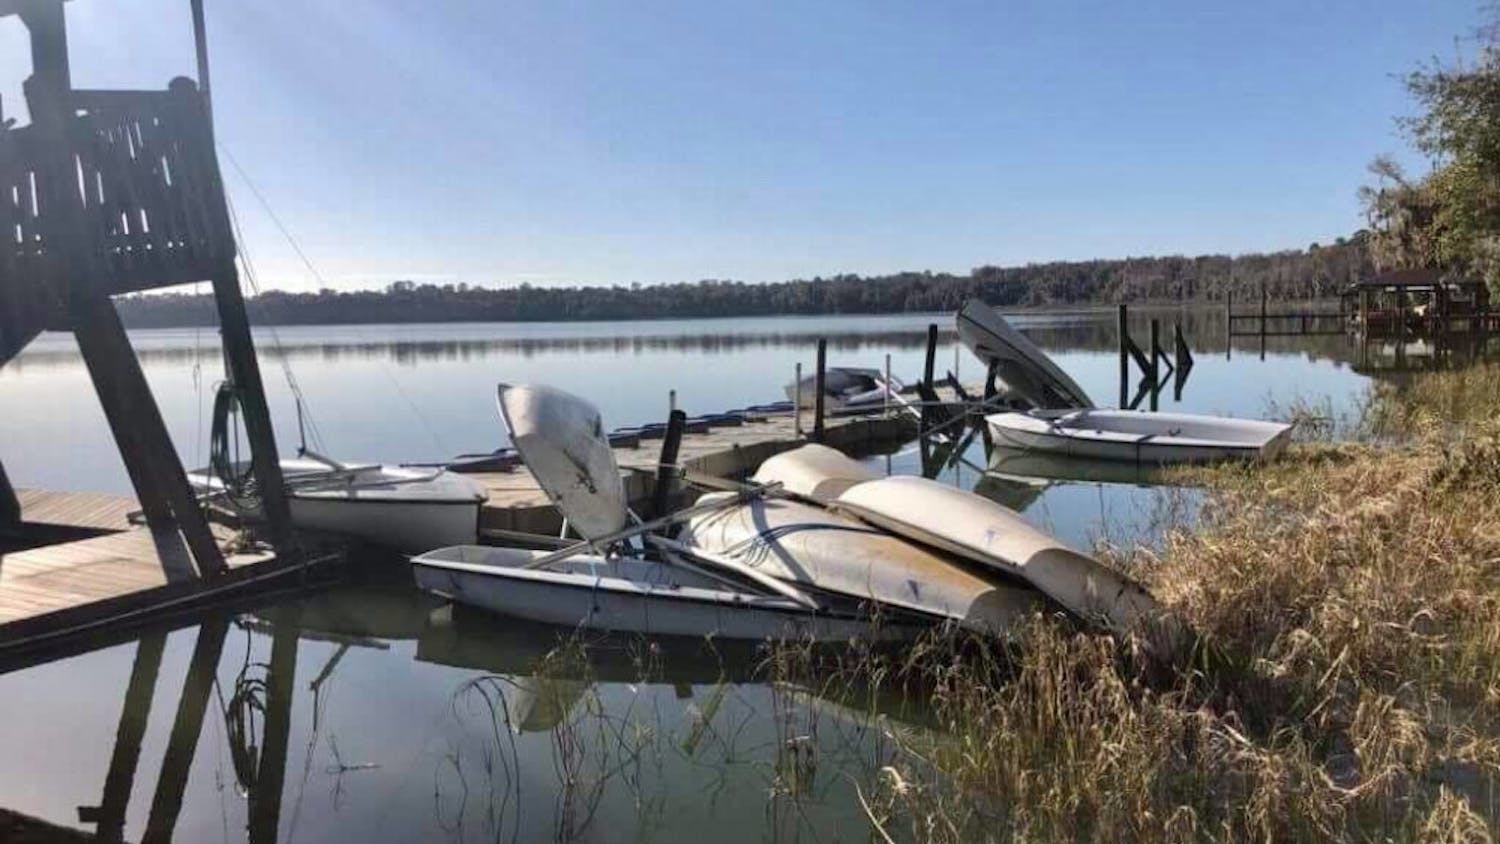 Most of the UF Sailing Team’s equipment suffered damage on Lake Wauburg from high winds.